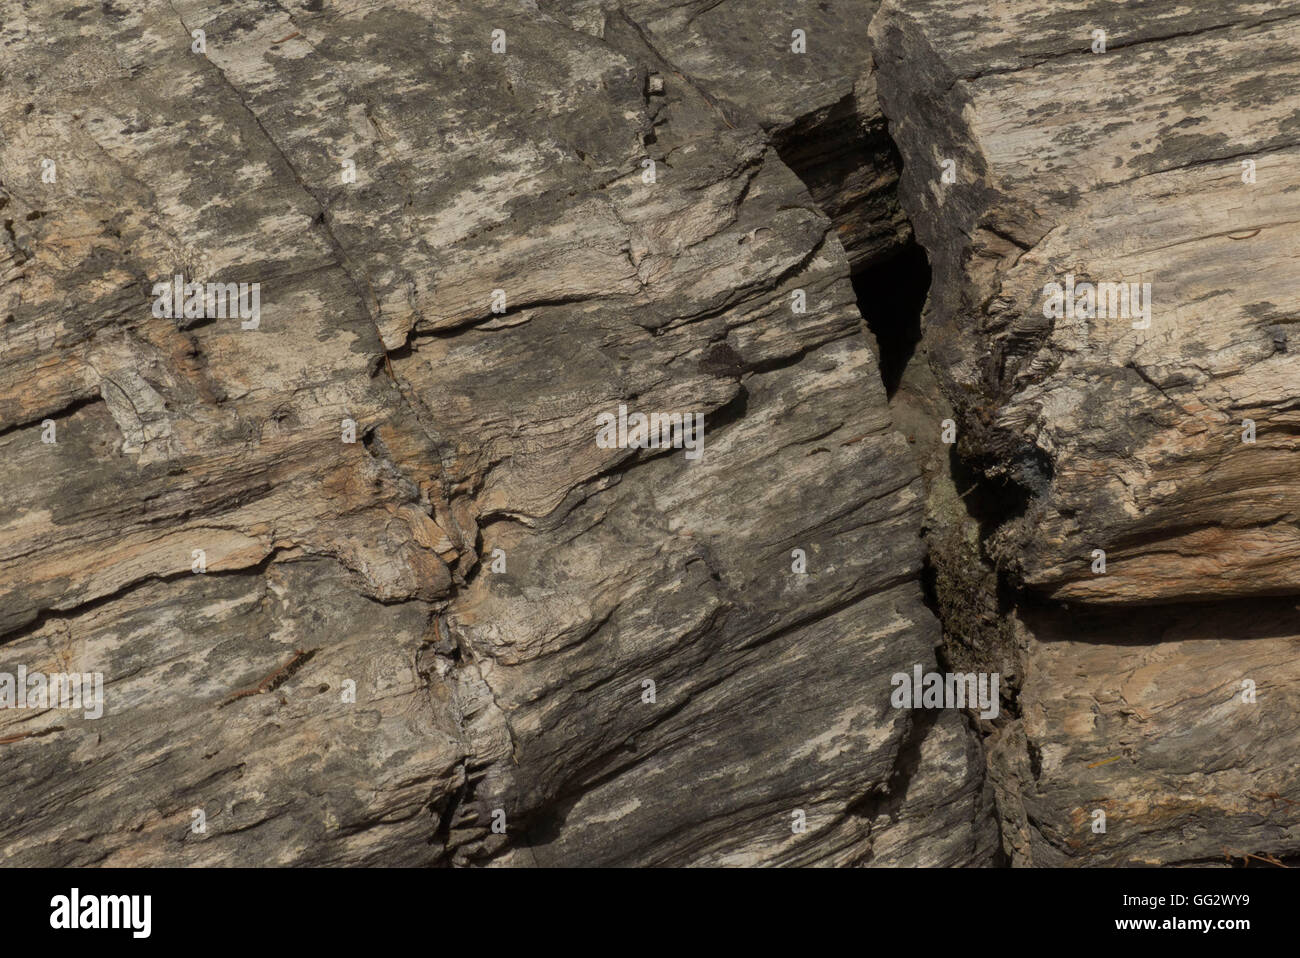 petrified wood trees in Petrified forest Northern California Stock Photo -  Alamy